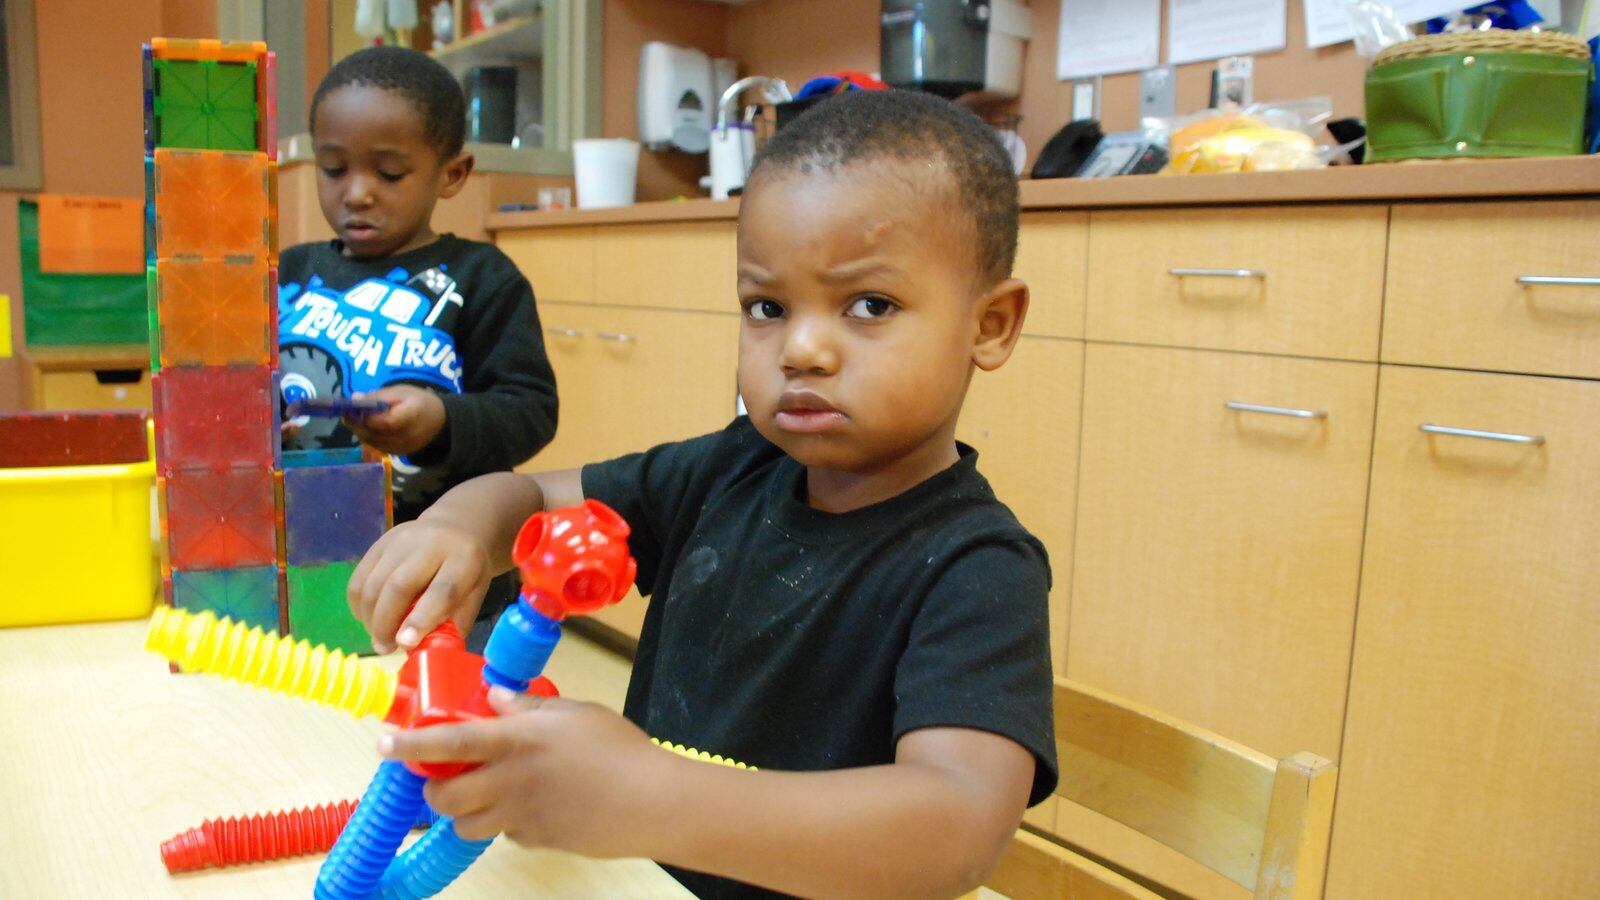 Shelby County government could add an additional $2.5 million for pre-K for the new fiscal year starting on July 1.